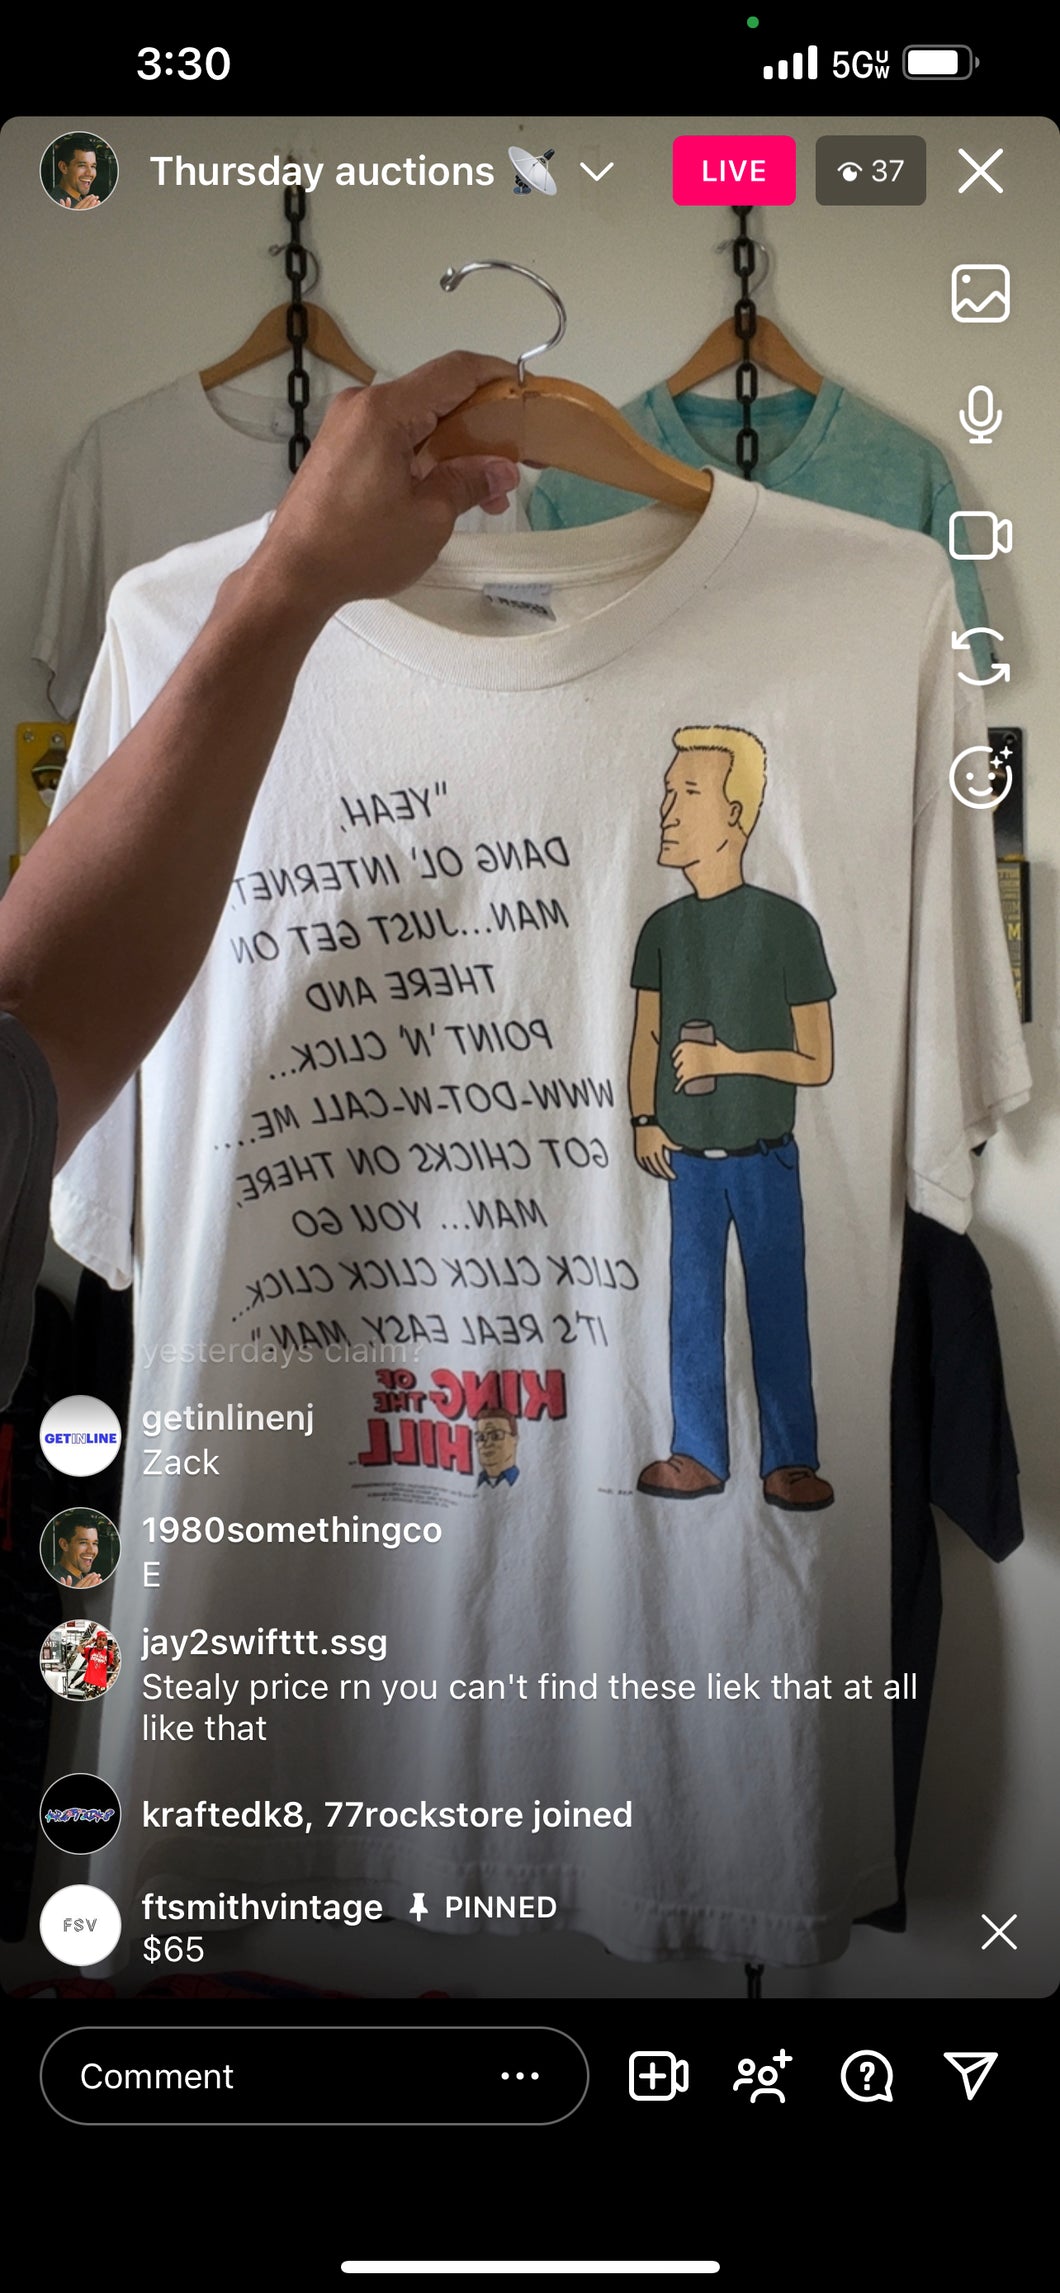 ‘97 King of the Hill shirt (secondhand)